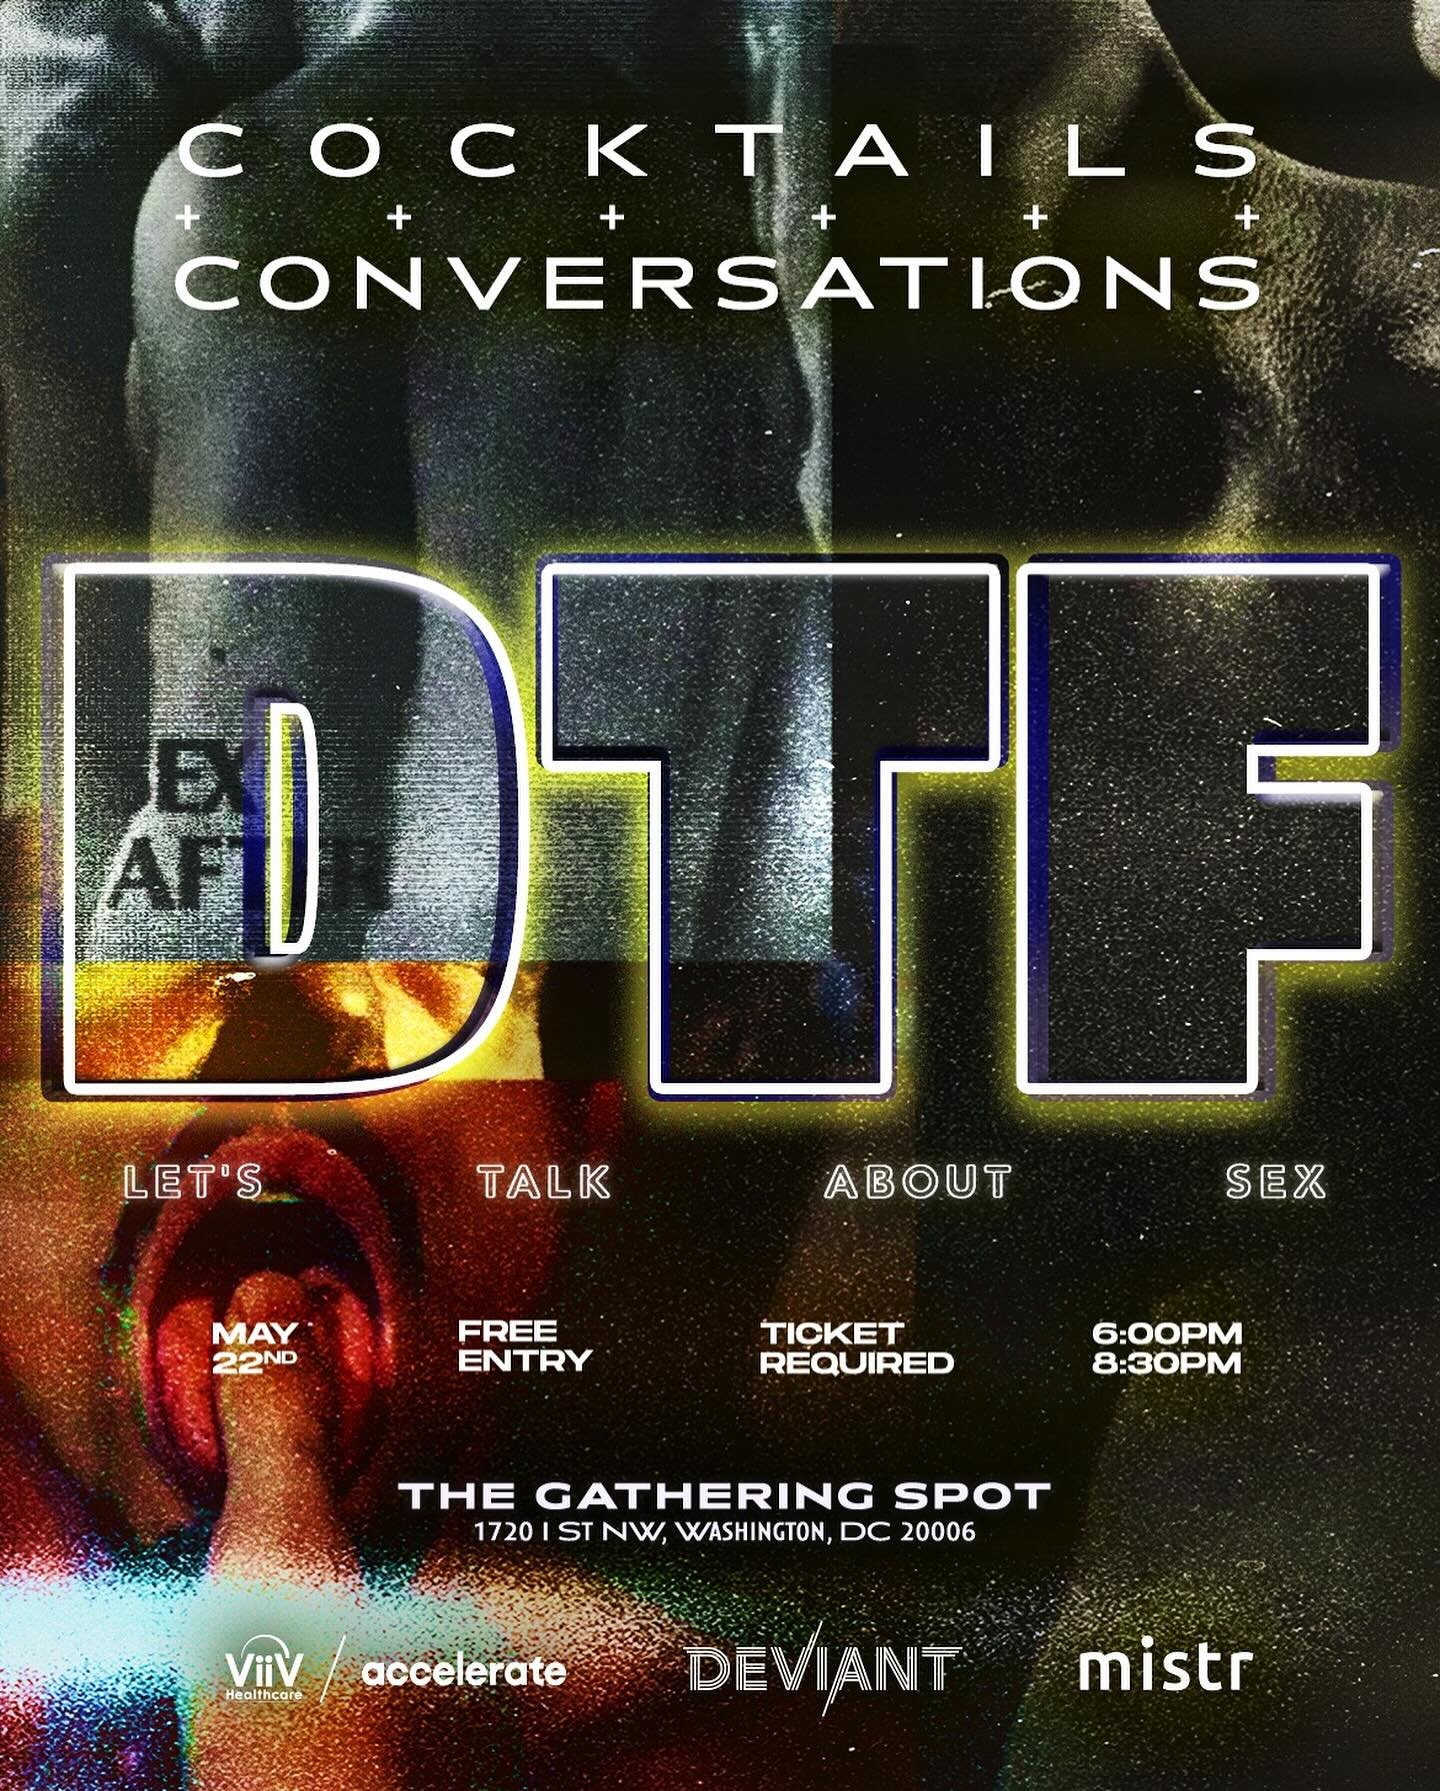 DC: Cocktails &amp; Conversations &ldquo;DTF&rdquo; asks how you qualify OR disqualify people for sex.

Wednesday, May 22nd
The Gathering Spot
6&mdash; 11pm